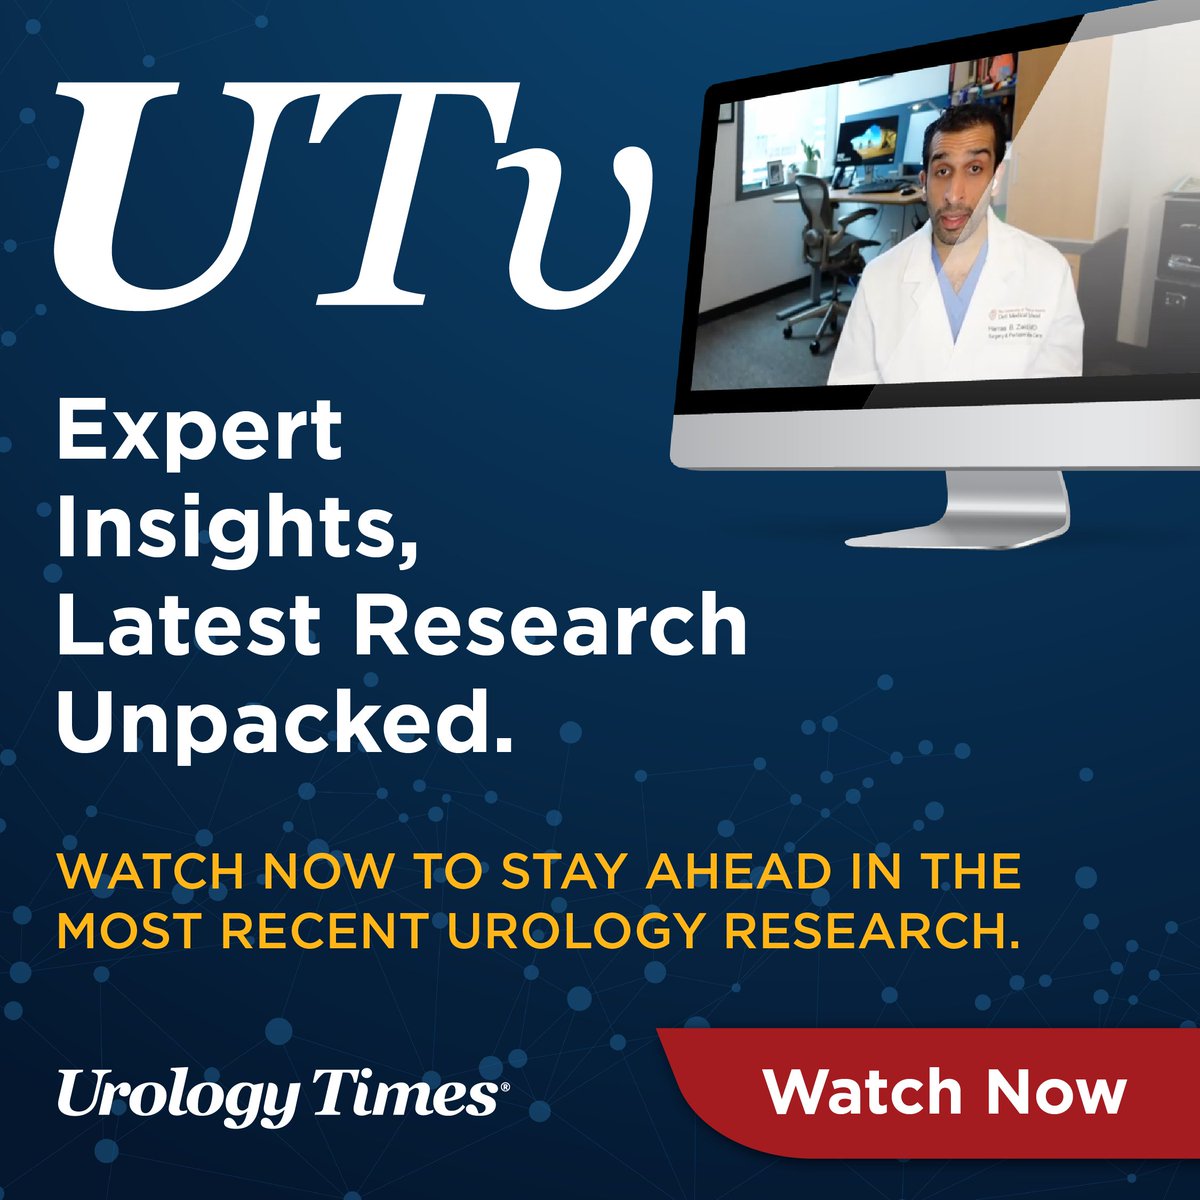 Check out Urology Times' latest video with Dr. Daniel J. Heidenberg from Mayo Clinic in Phoenix! Discover how findings from the recent Urology paper could impact clinical practice. Don't miss this insightful discussion! ow.ly/F8hj50Rh4X2